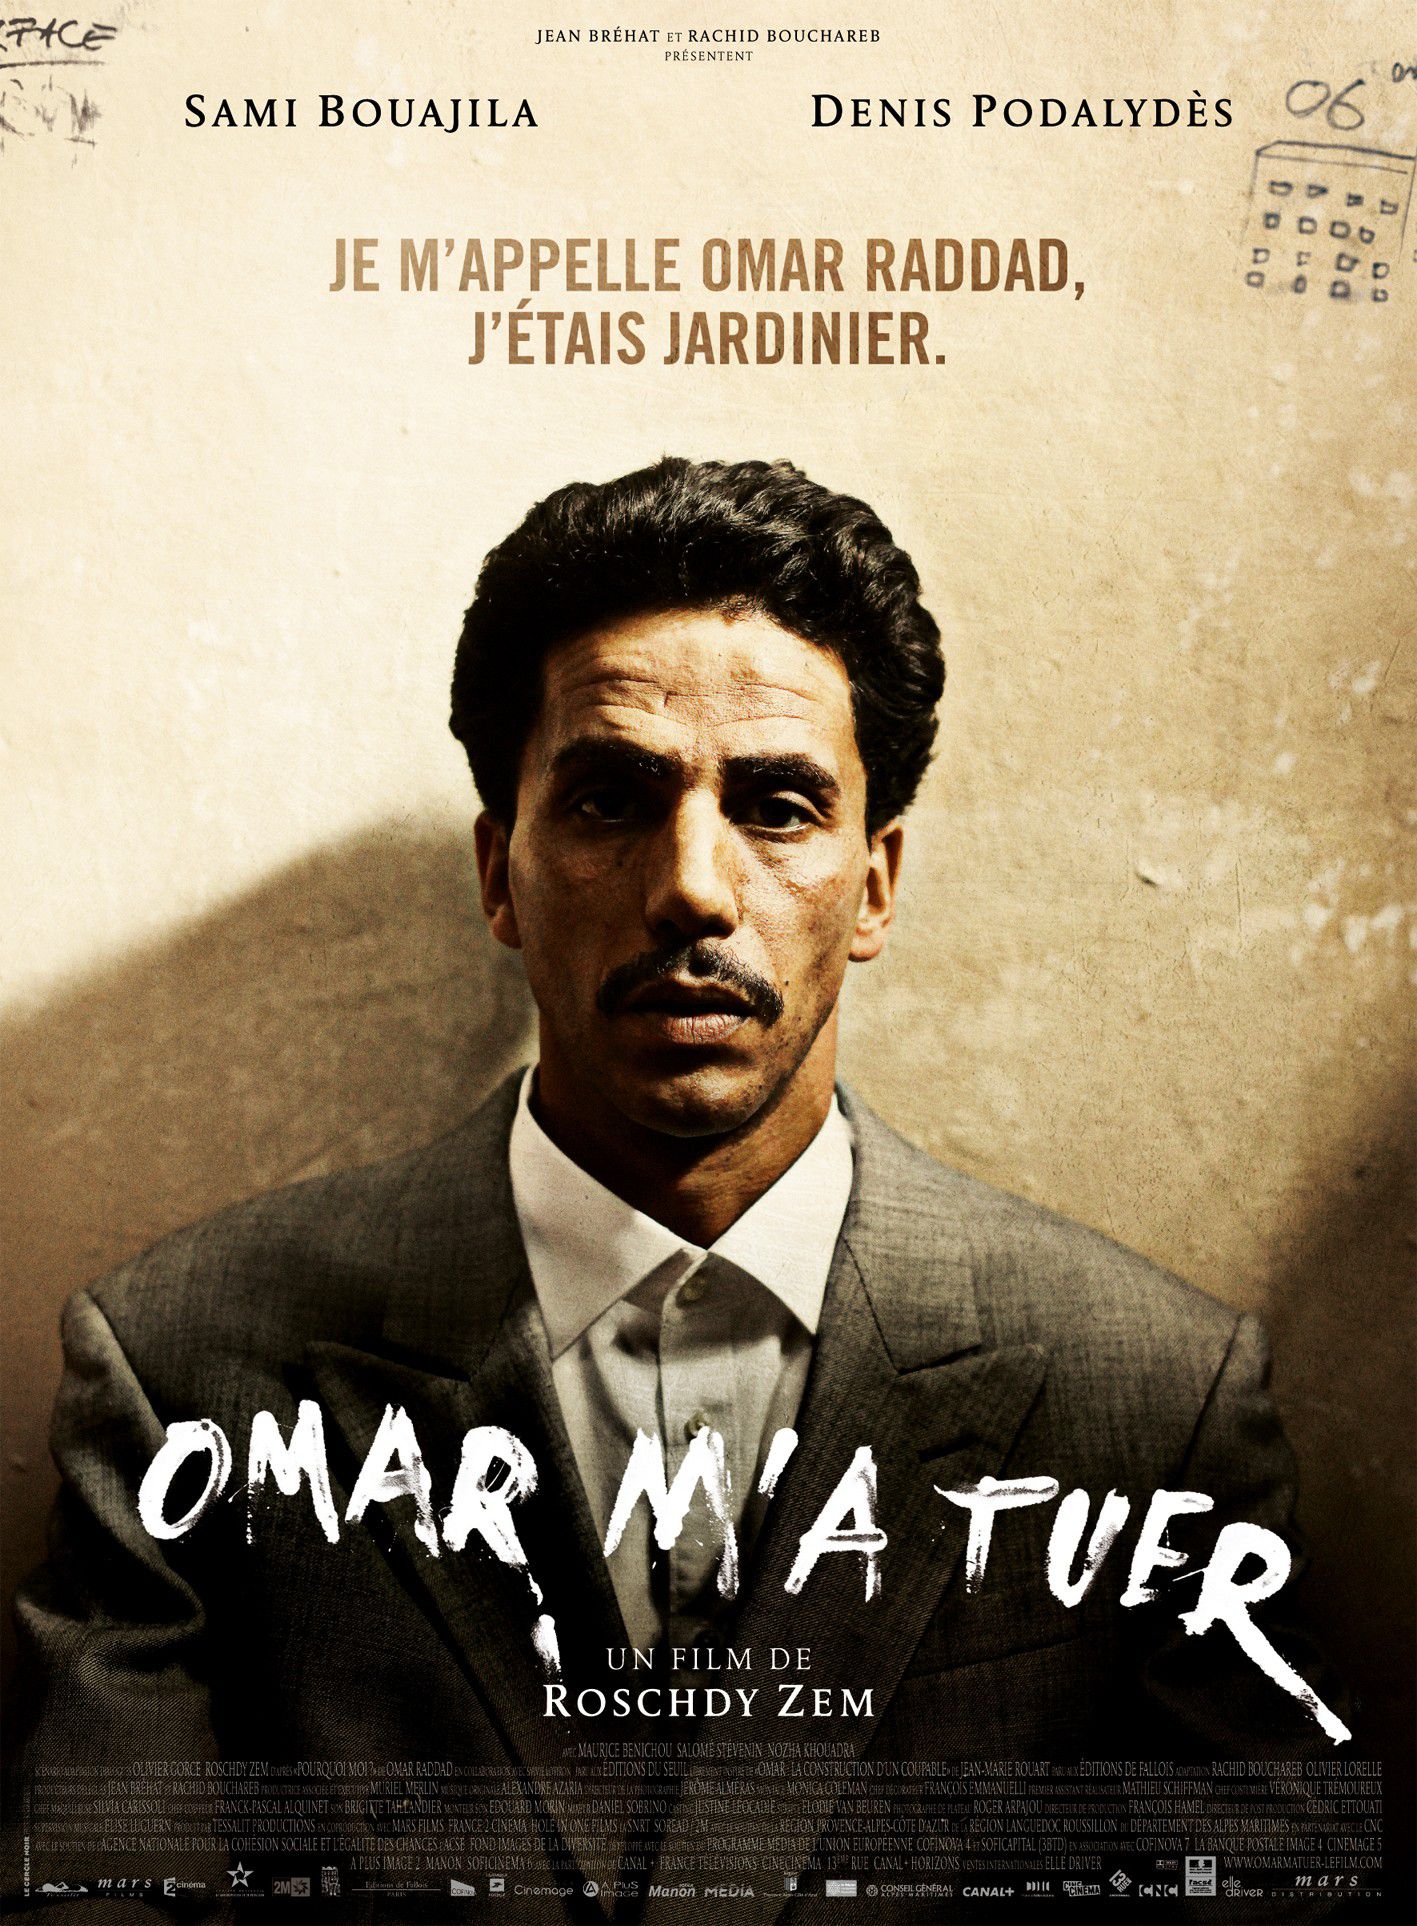 Omar m'a tuer - Film (2011) streaming VF gratuit complet